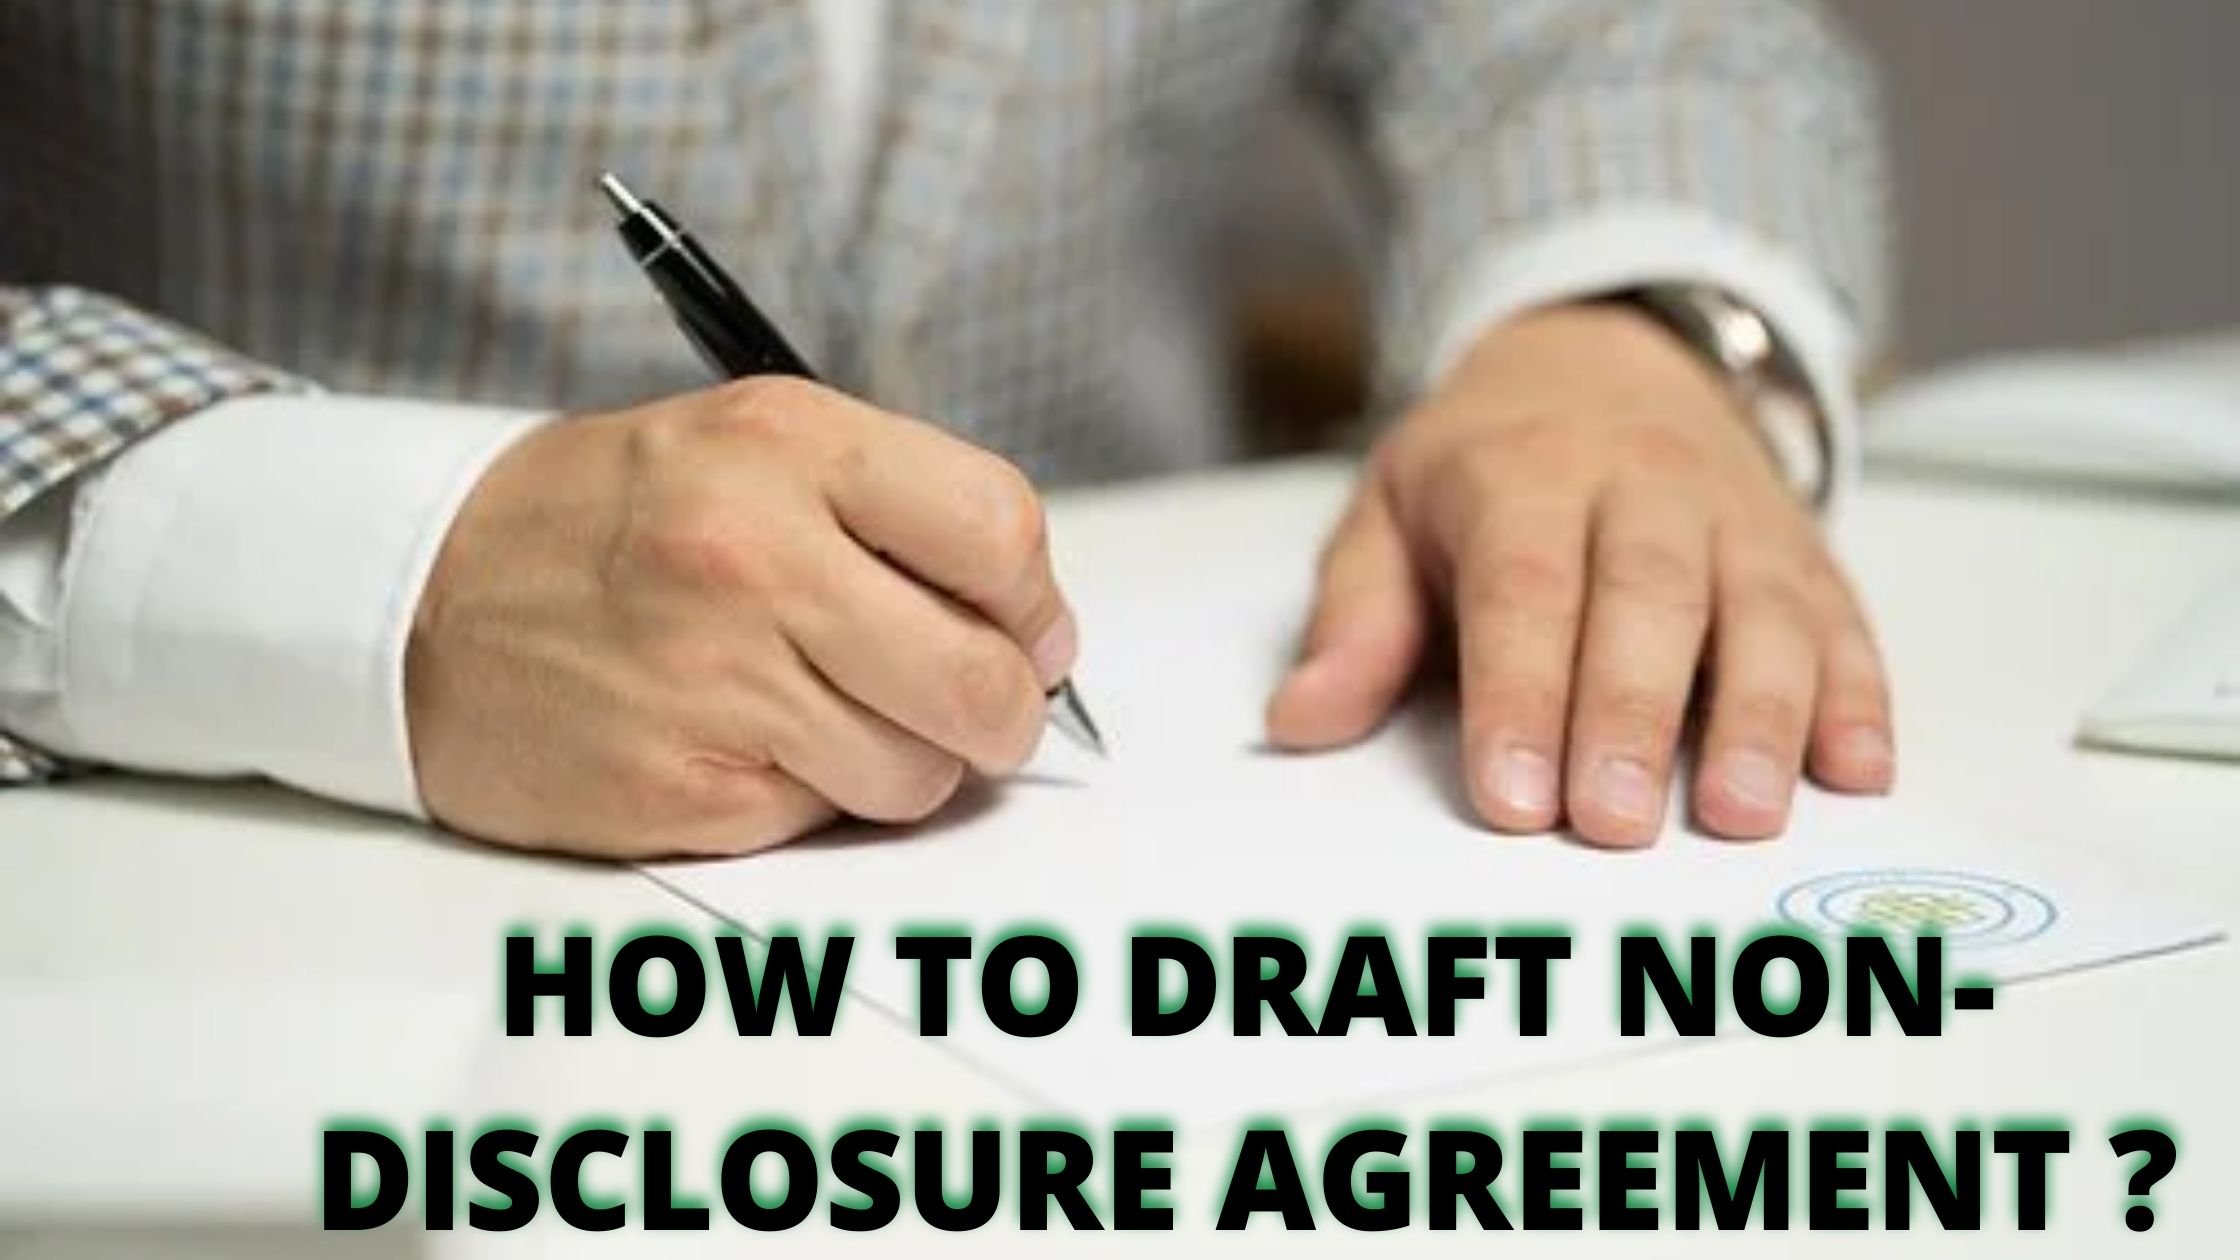 HOW TO DRAFT A NON-DISCLOSURE AGREEMENT?